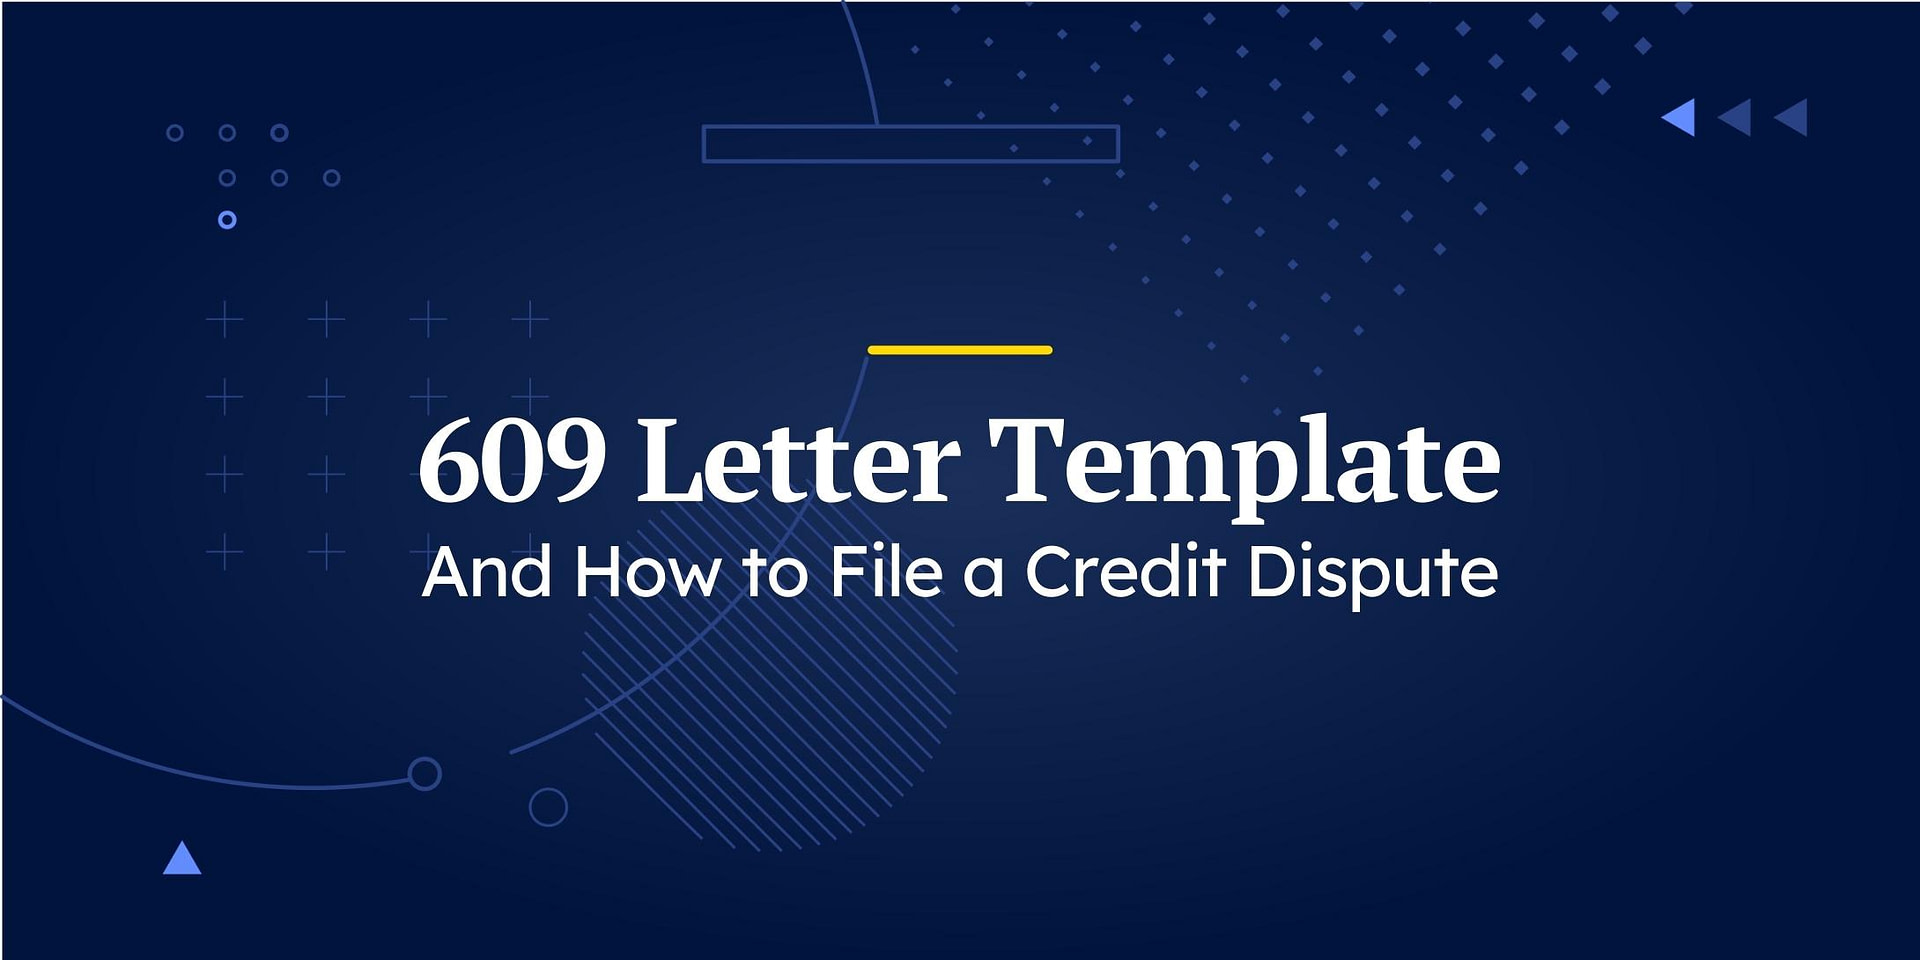 609-letter-template-how-to-file-a-credit-dispute